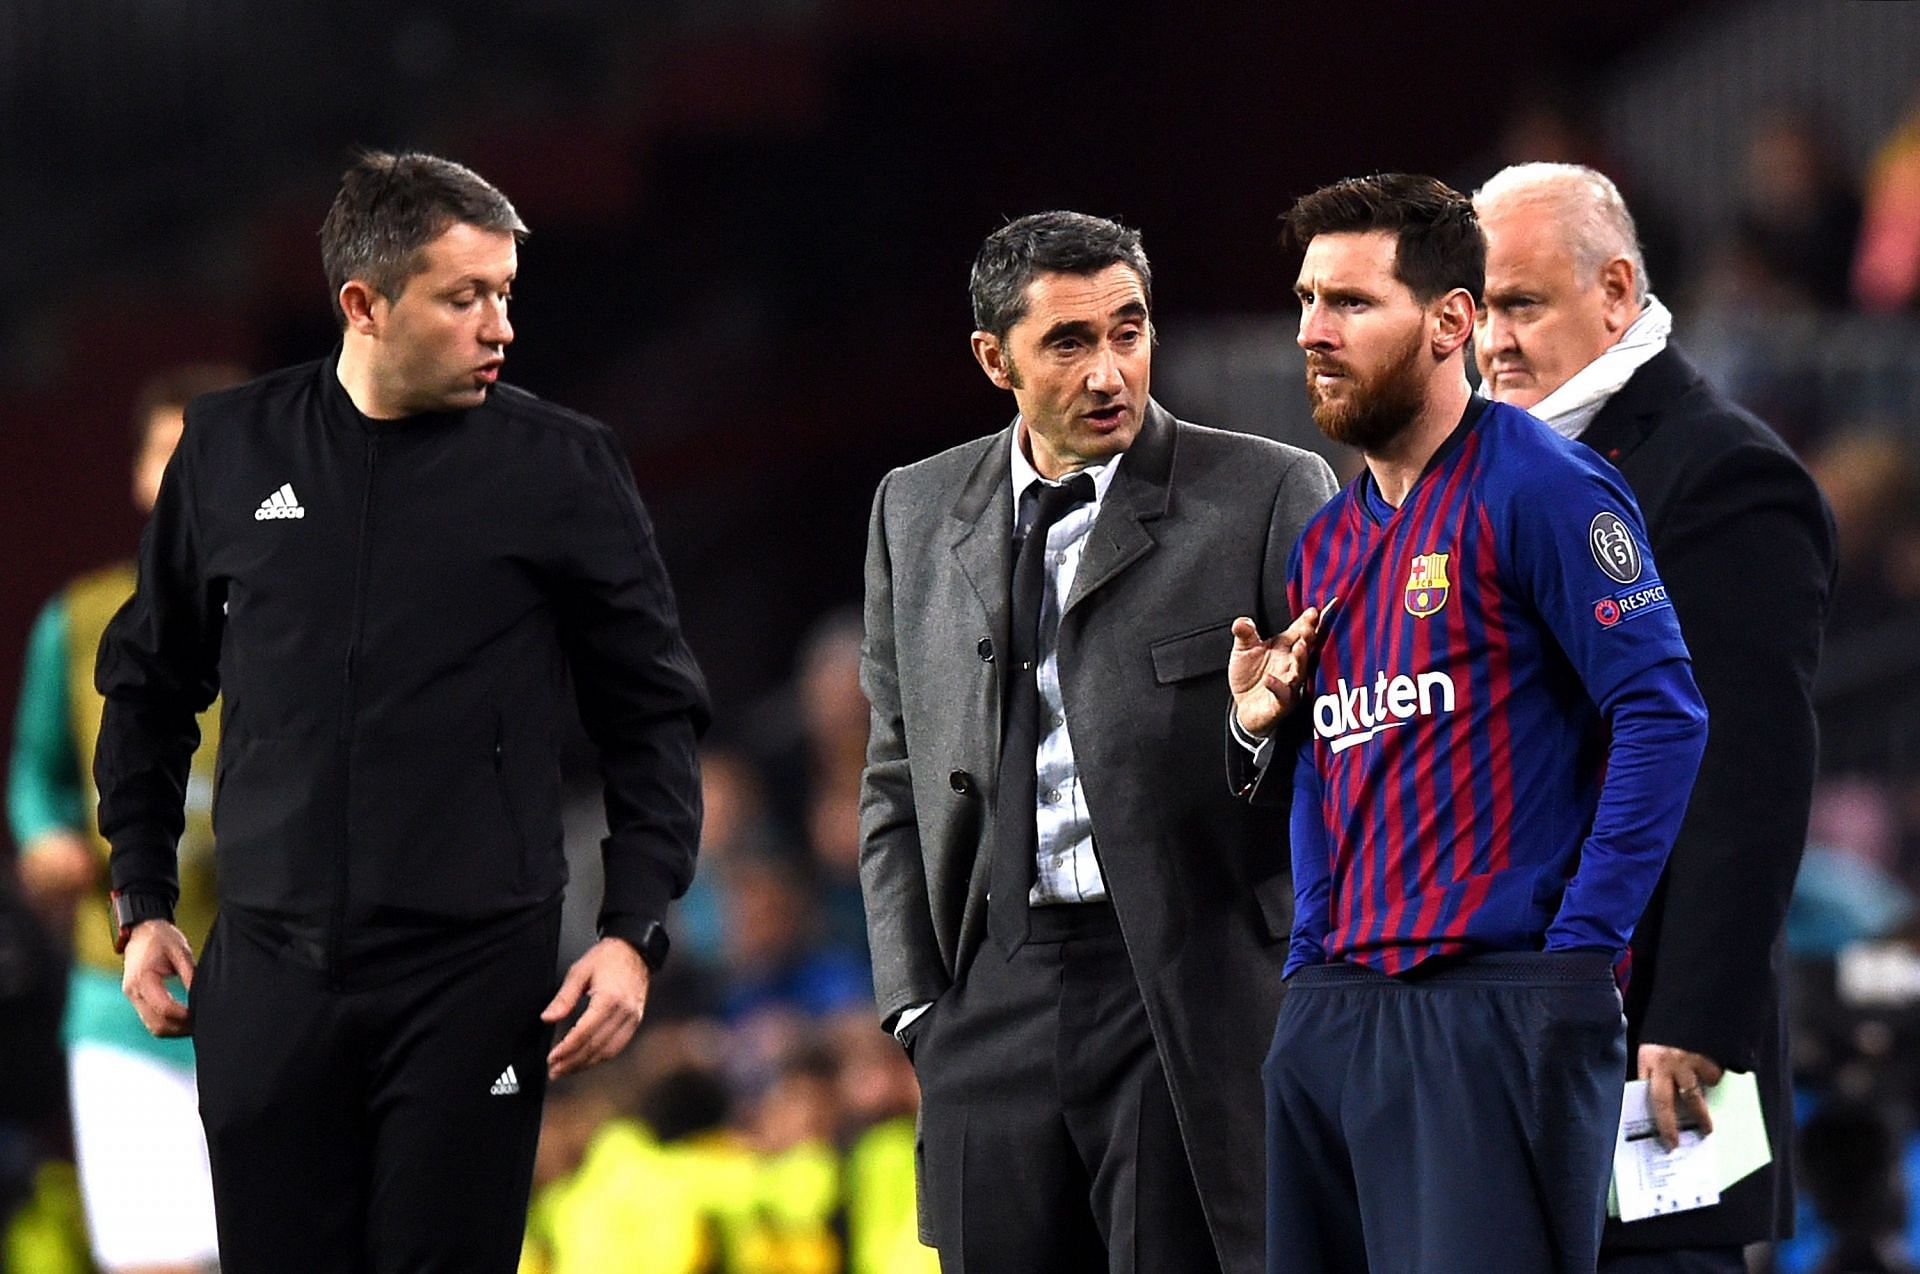 Valverde giving instructions to Messi during a Champions League game